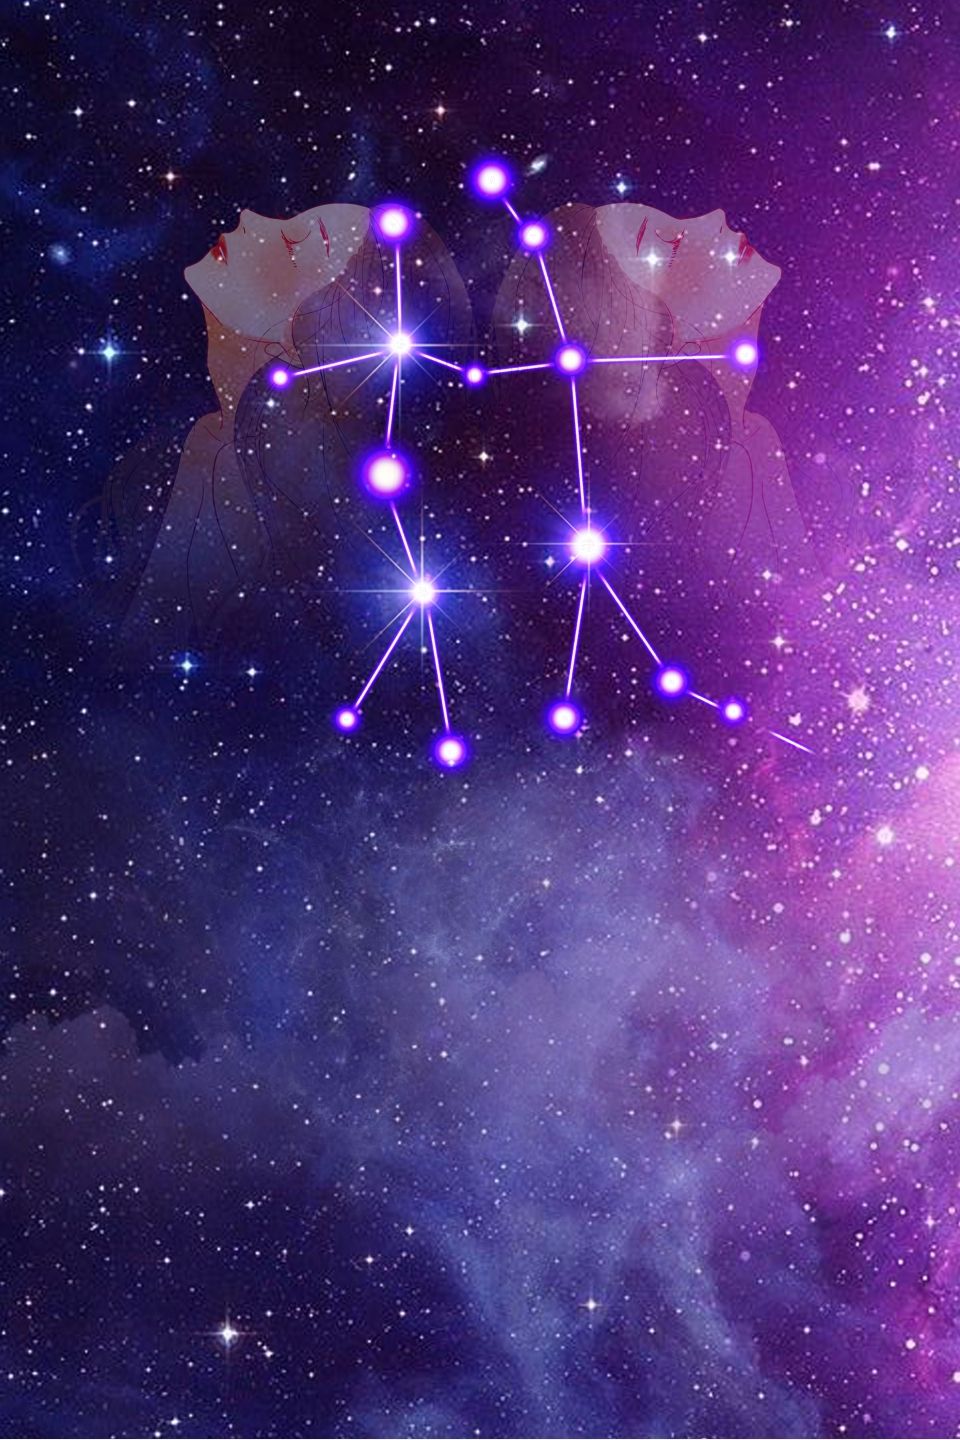 Creative Aesthetic Starry Sky 12 Constellation Gemini Background Synthesis, Constellation, Twelve Constellations, Starry Sky Background Image for Free Download